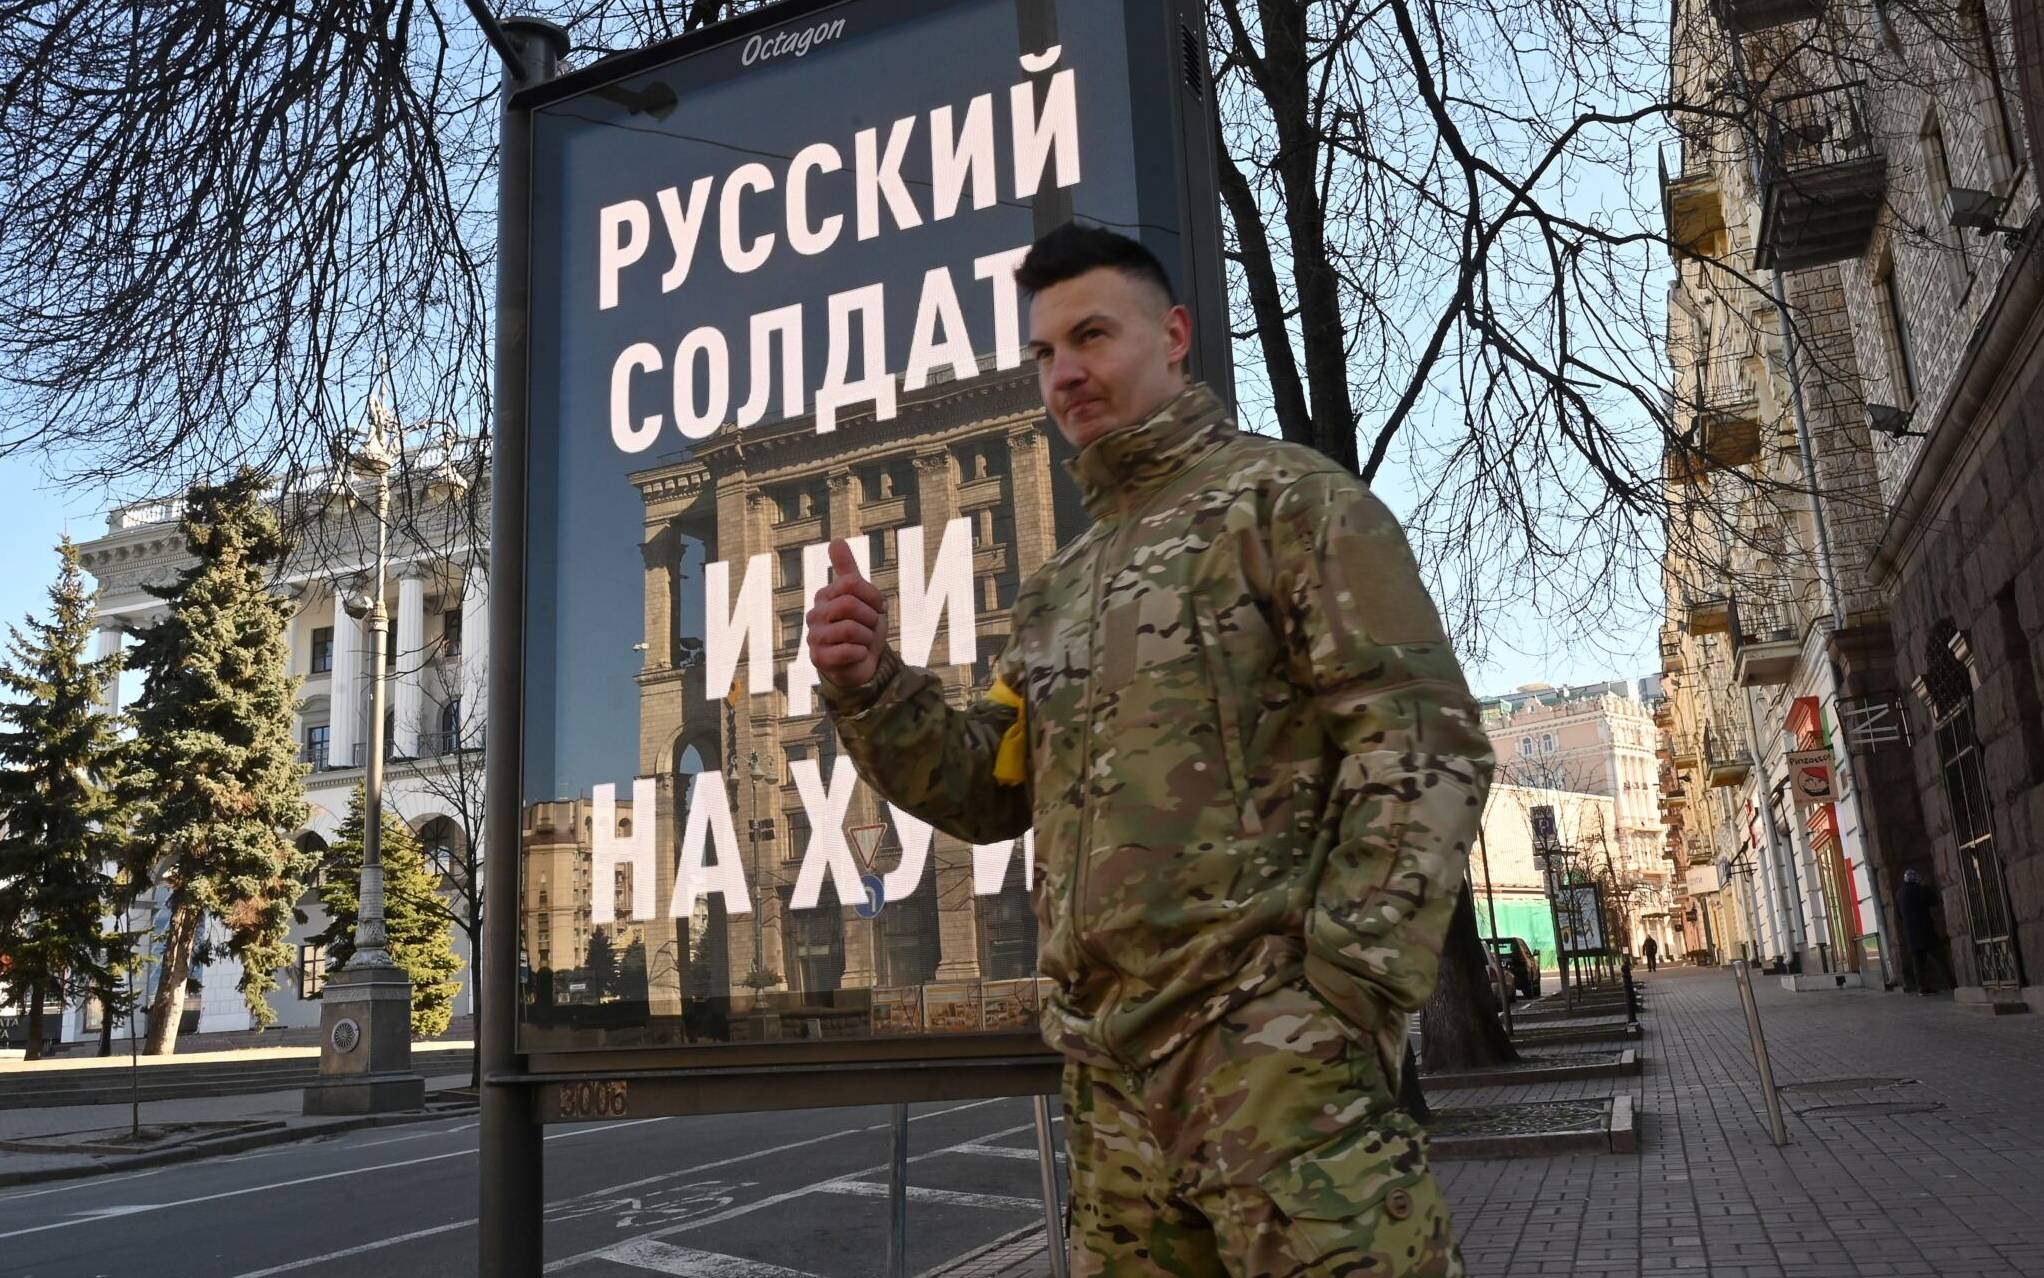 A fighter of the Ukrainian Territorial Defence Forces, the military reserve of the Ukrainian Armed Forces, poses for a picture by an advertising board with a message reading "A Russian soldier, go fuck yourself" at Kyiv's Independence Square on February 28, 2022. - The Russian army said on February 28, 2022, that Ukrainian civilians could "freely" leave the country's capital Kyiv and claimed its airforce dominated Ukraine's skies as its invasion entered a fifth day. (Photo by Sergei SUPINSKY / AFP)